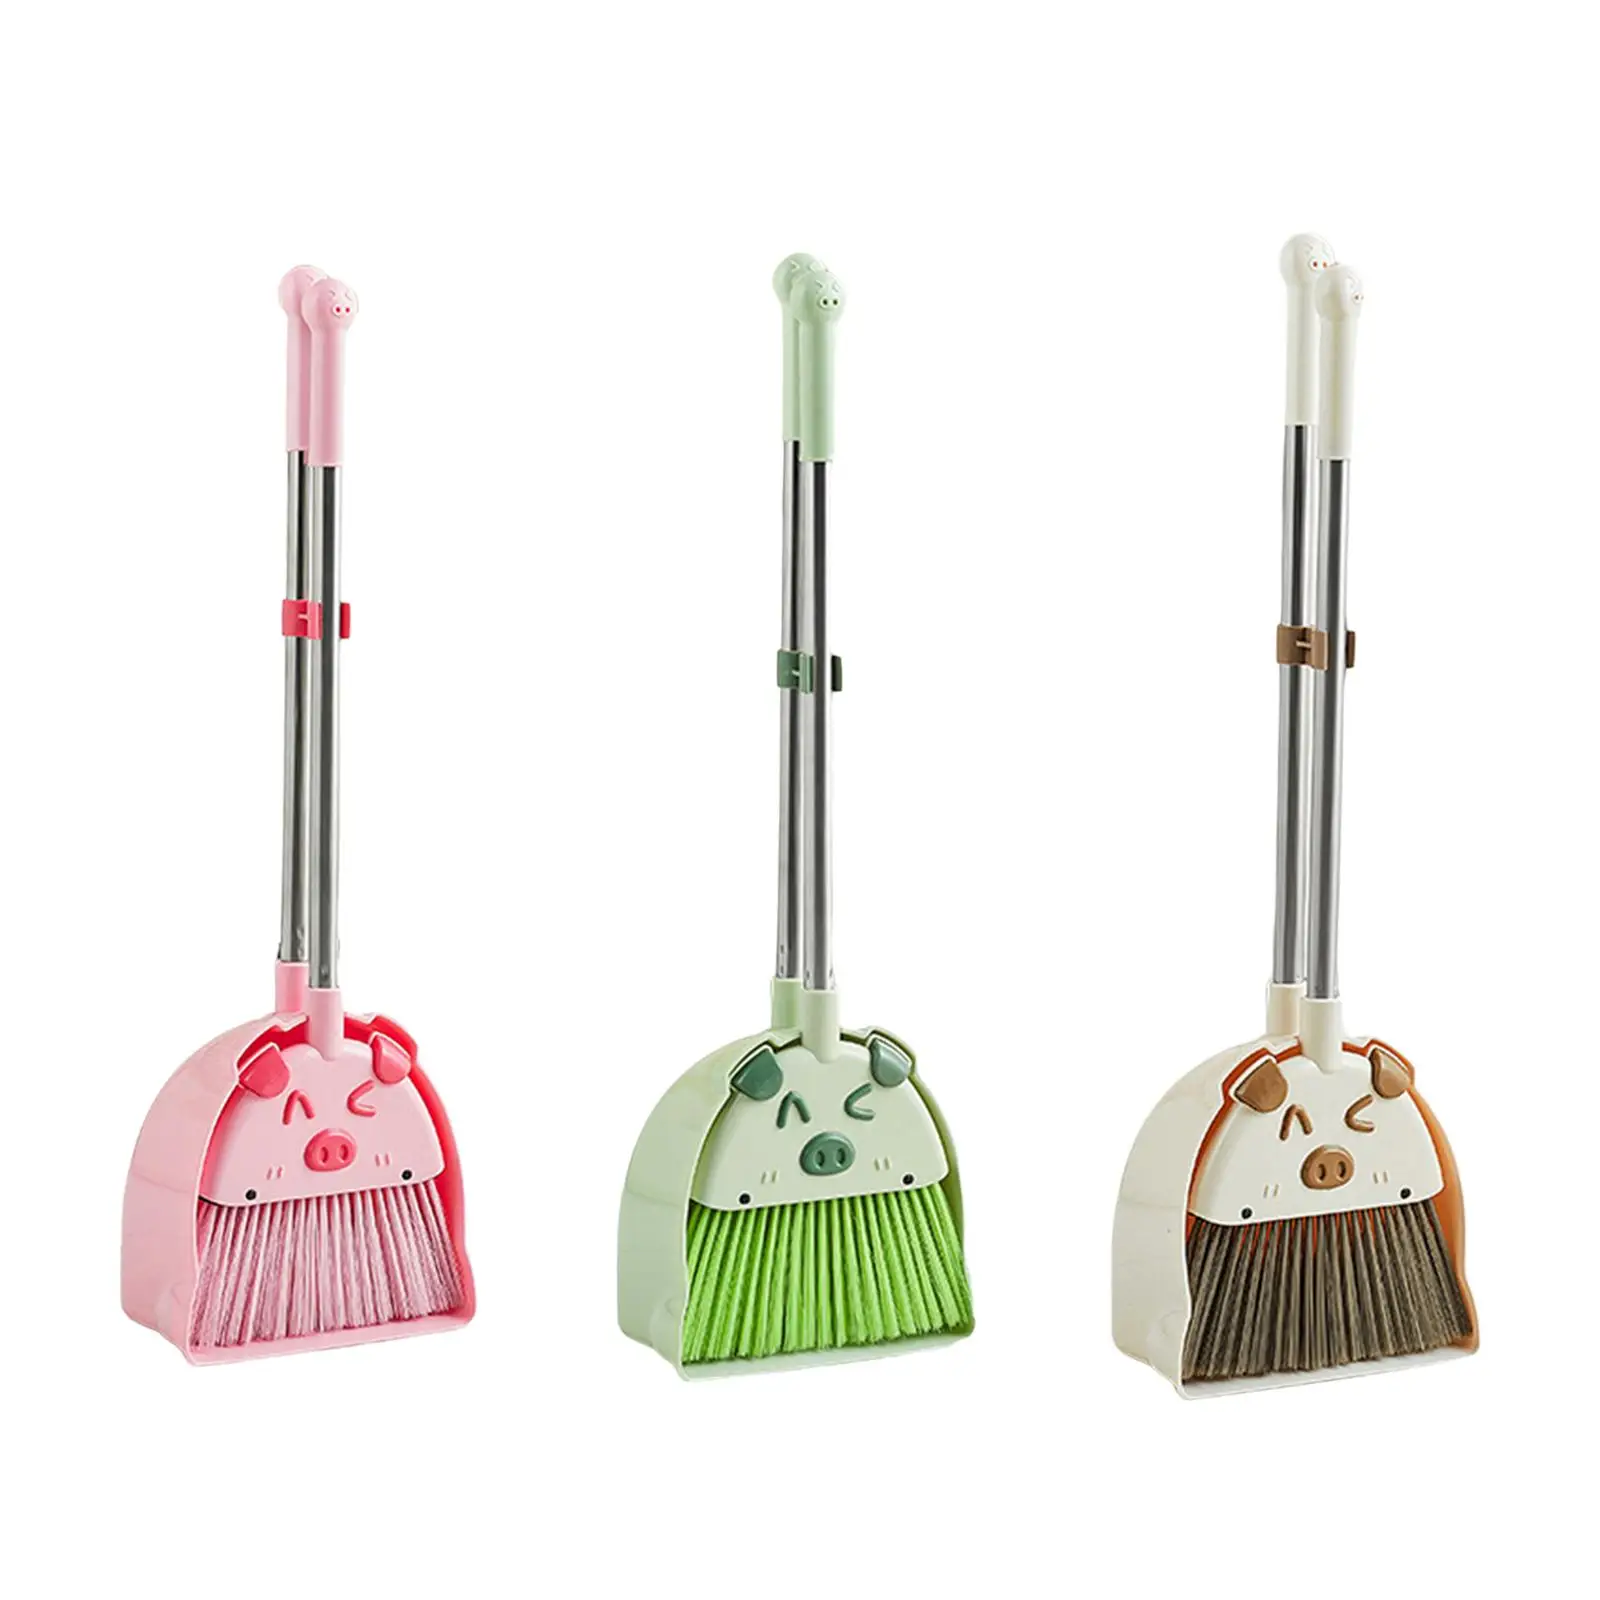 Kids Broom Dustpan Set Educational Toy House Cleaning Gifts Funny Kids Cleaning Set for Age 3-6 Girls Boys Birthday Gifts